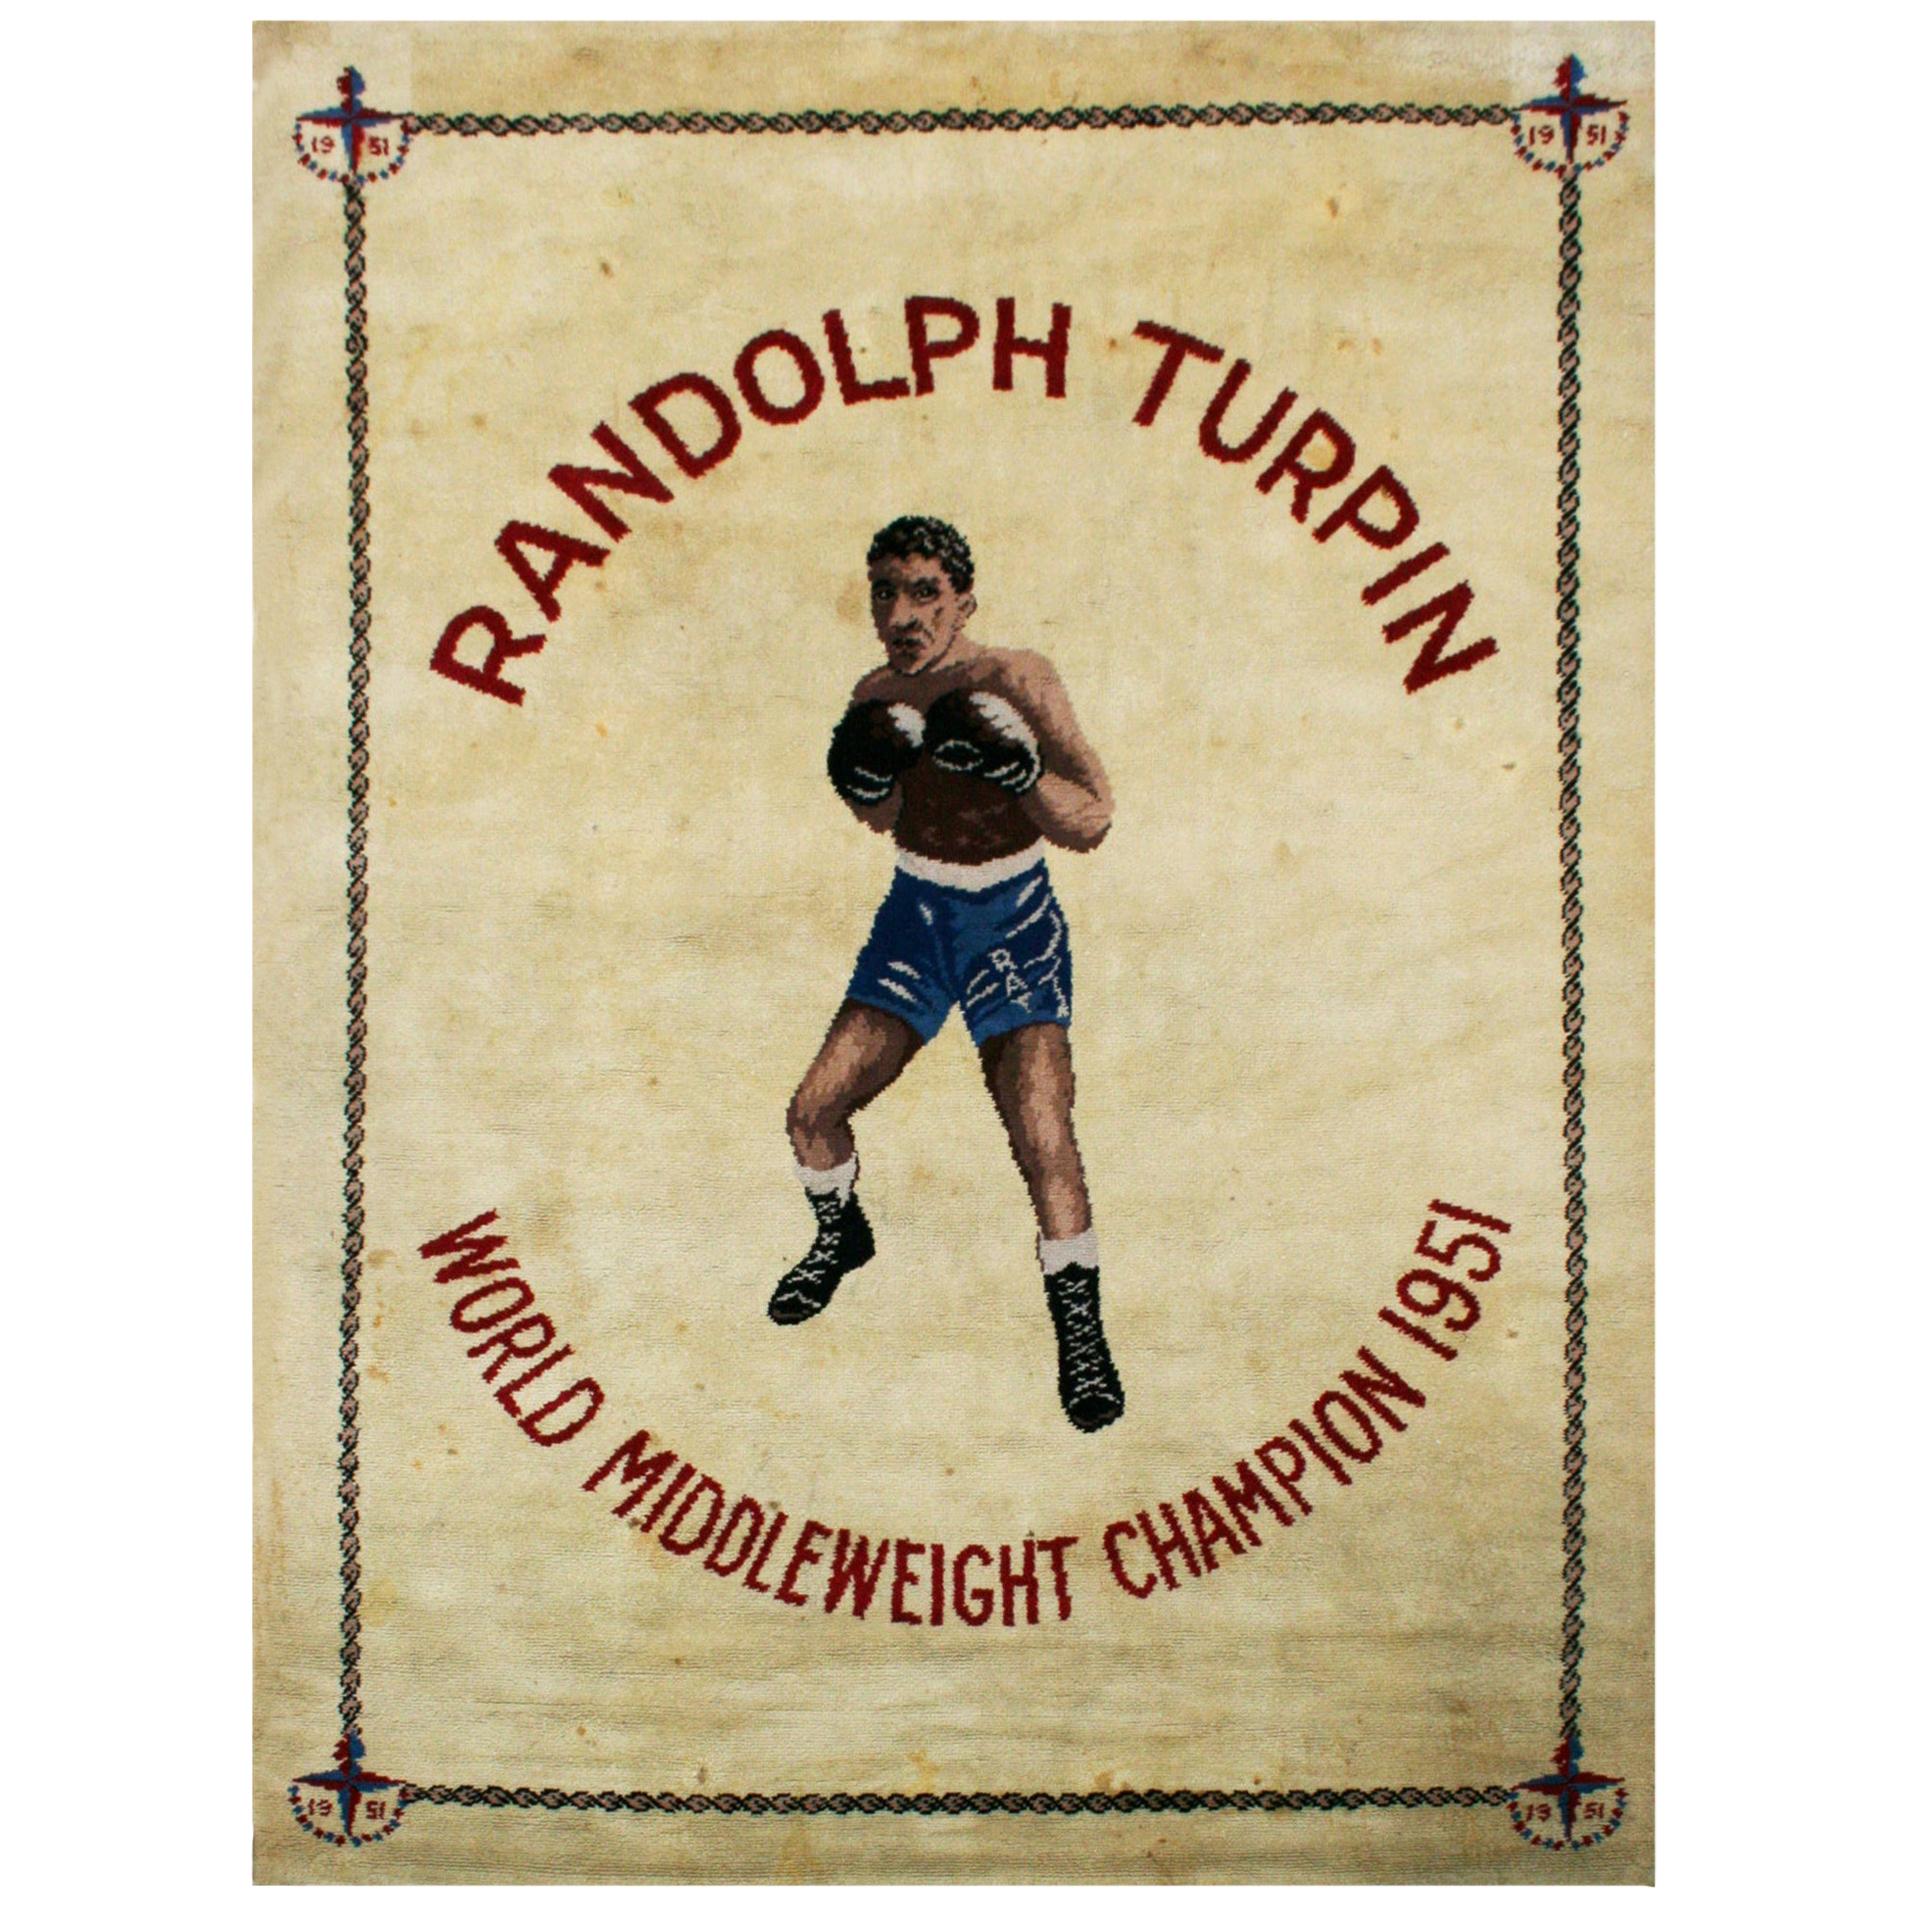 Boxing Carpet, Randolph Turpin, Middleweight Champion of the World, Sugar Ray For Sale